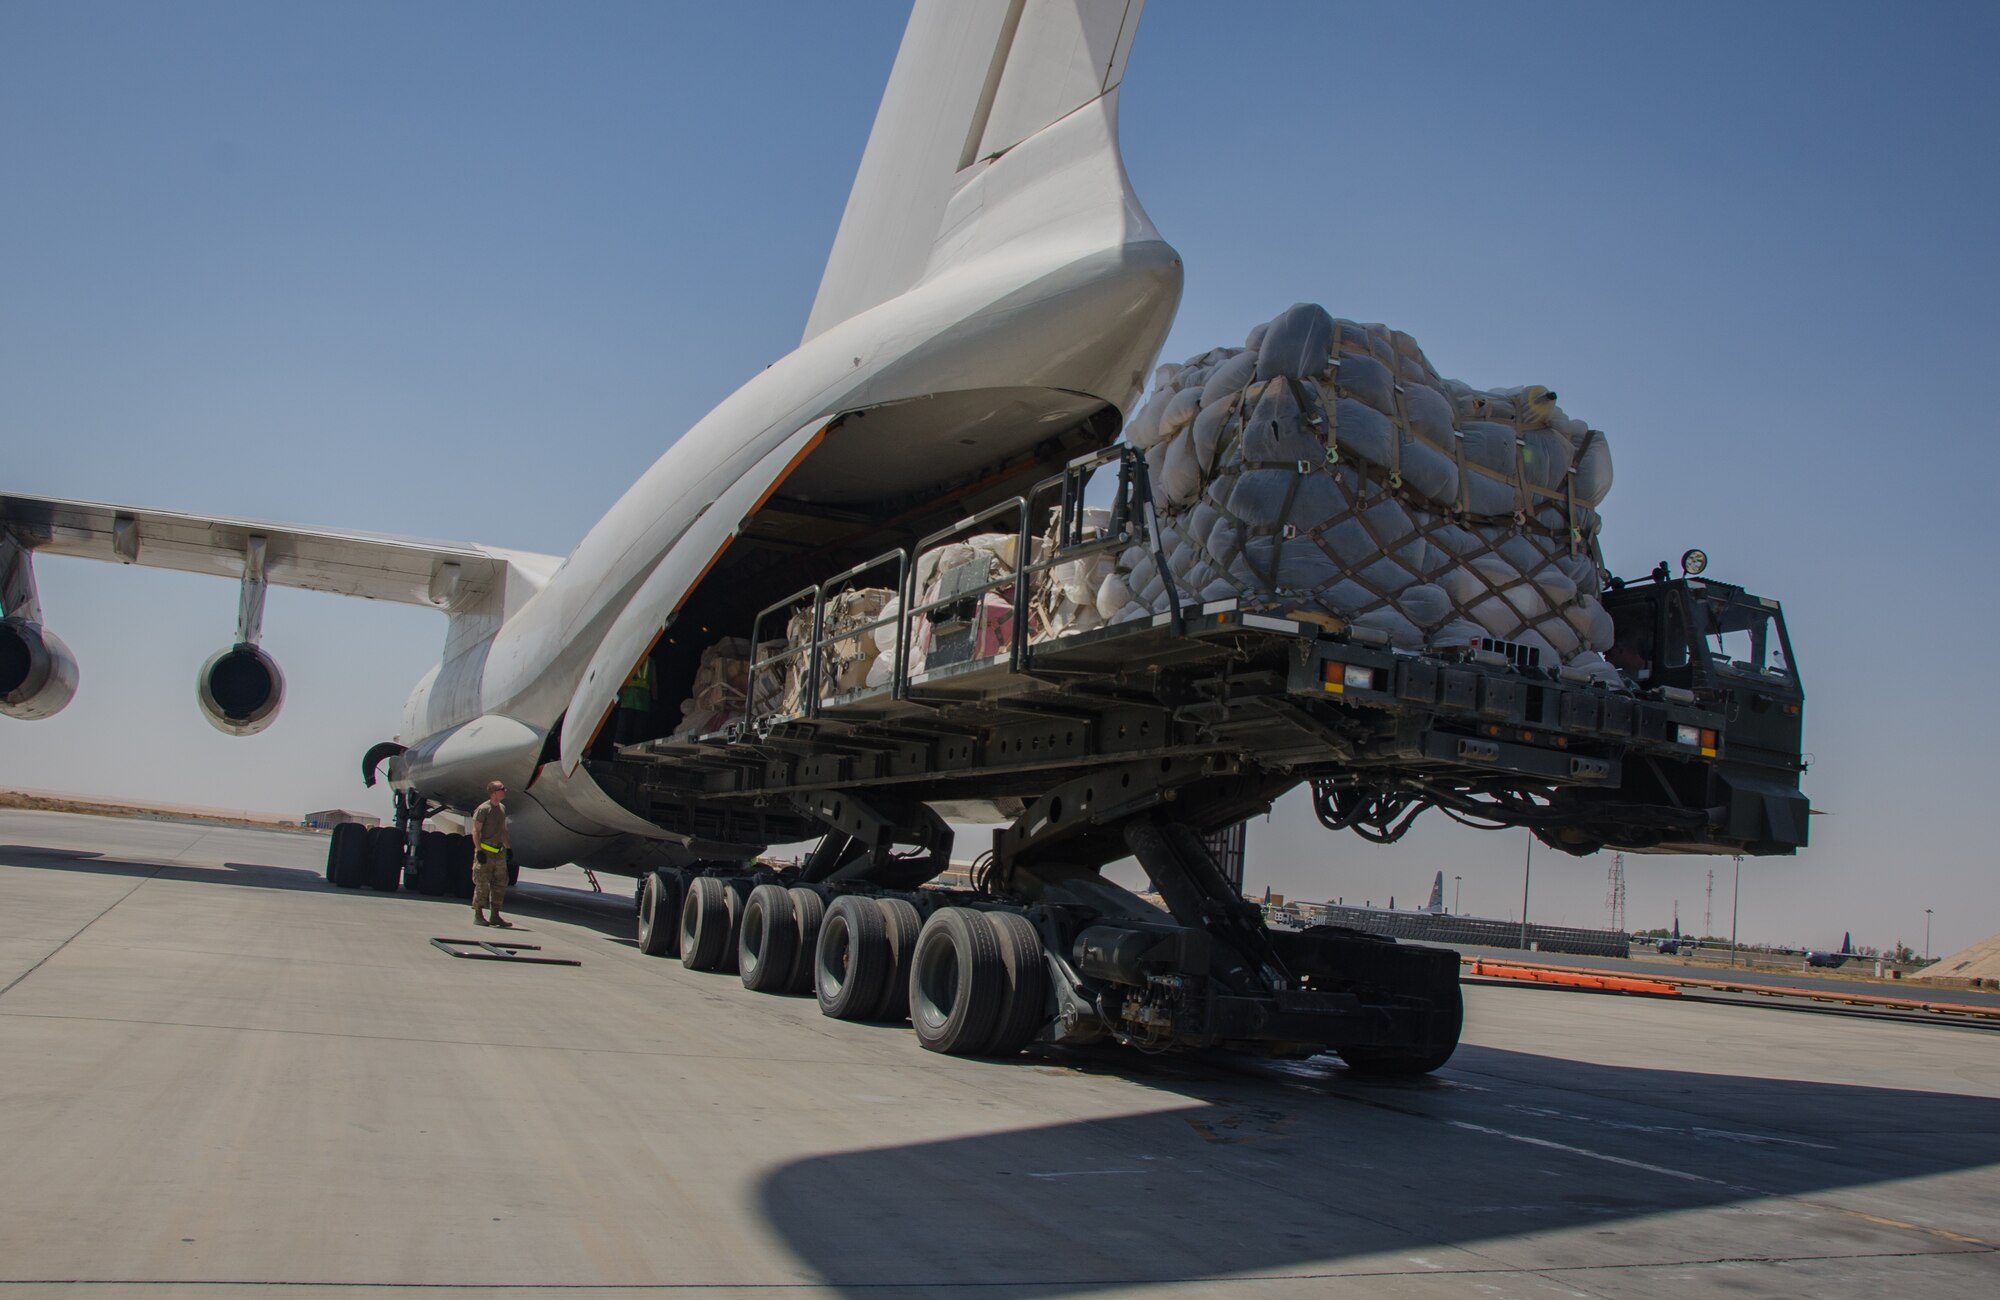 Airmen load a contracted Ilyushin IL-76 aircraft